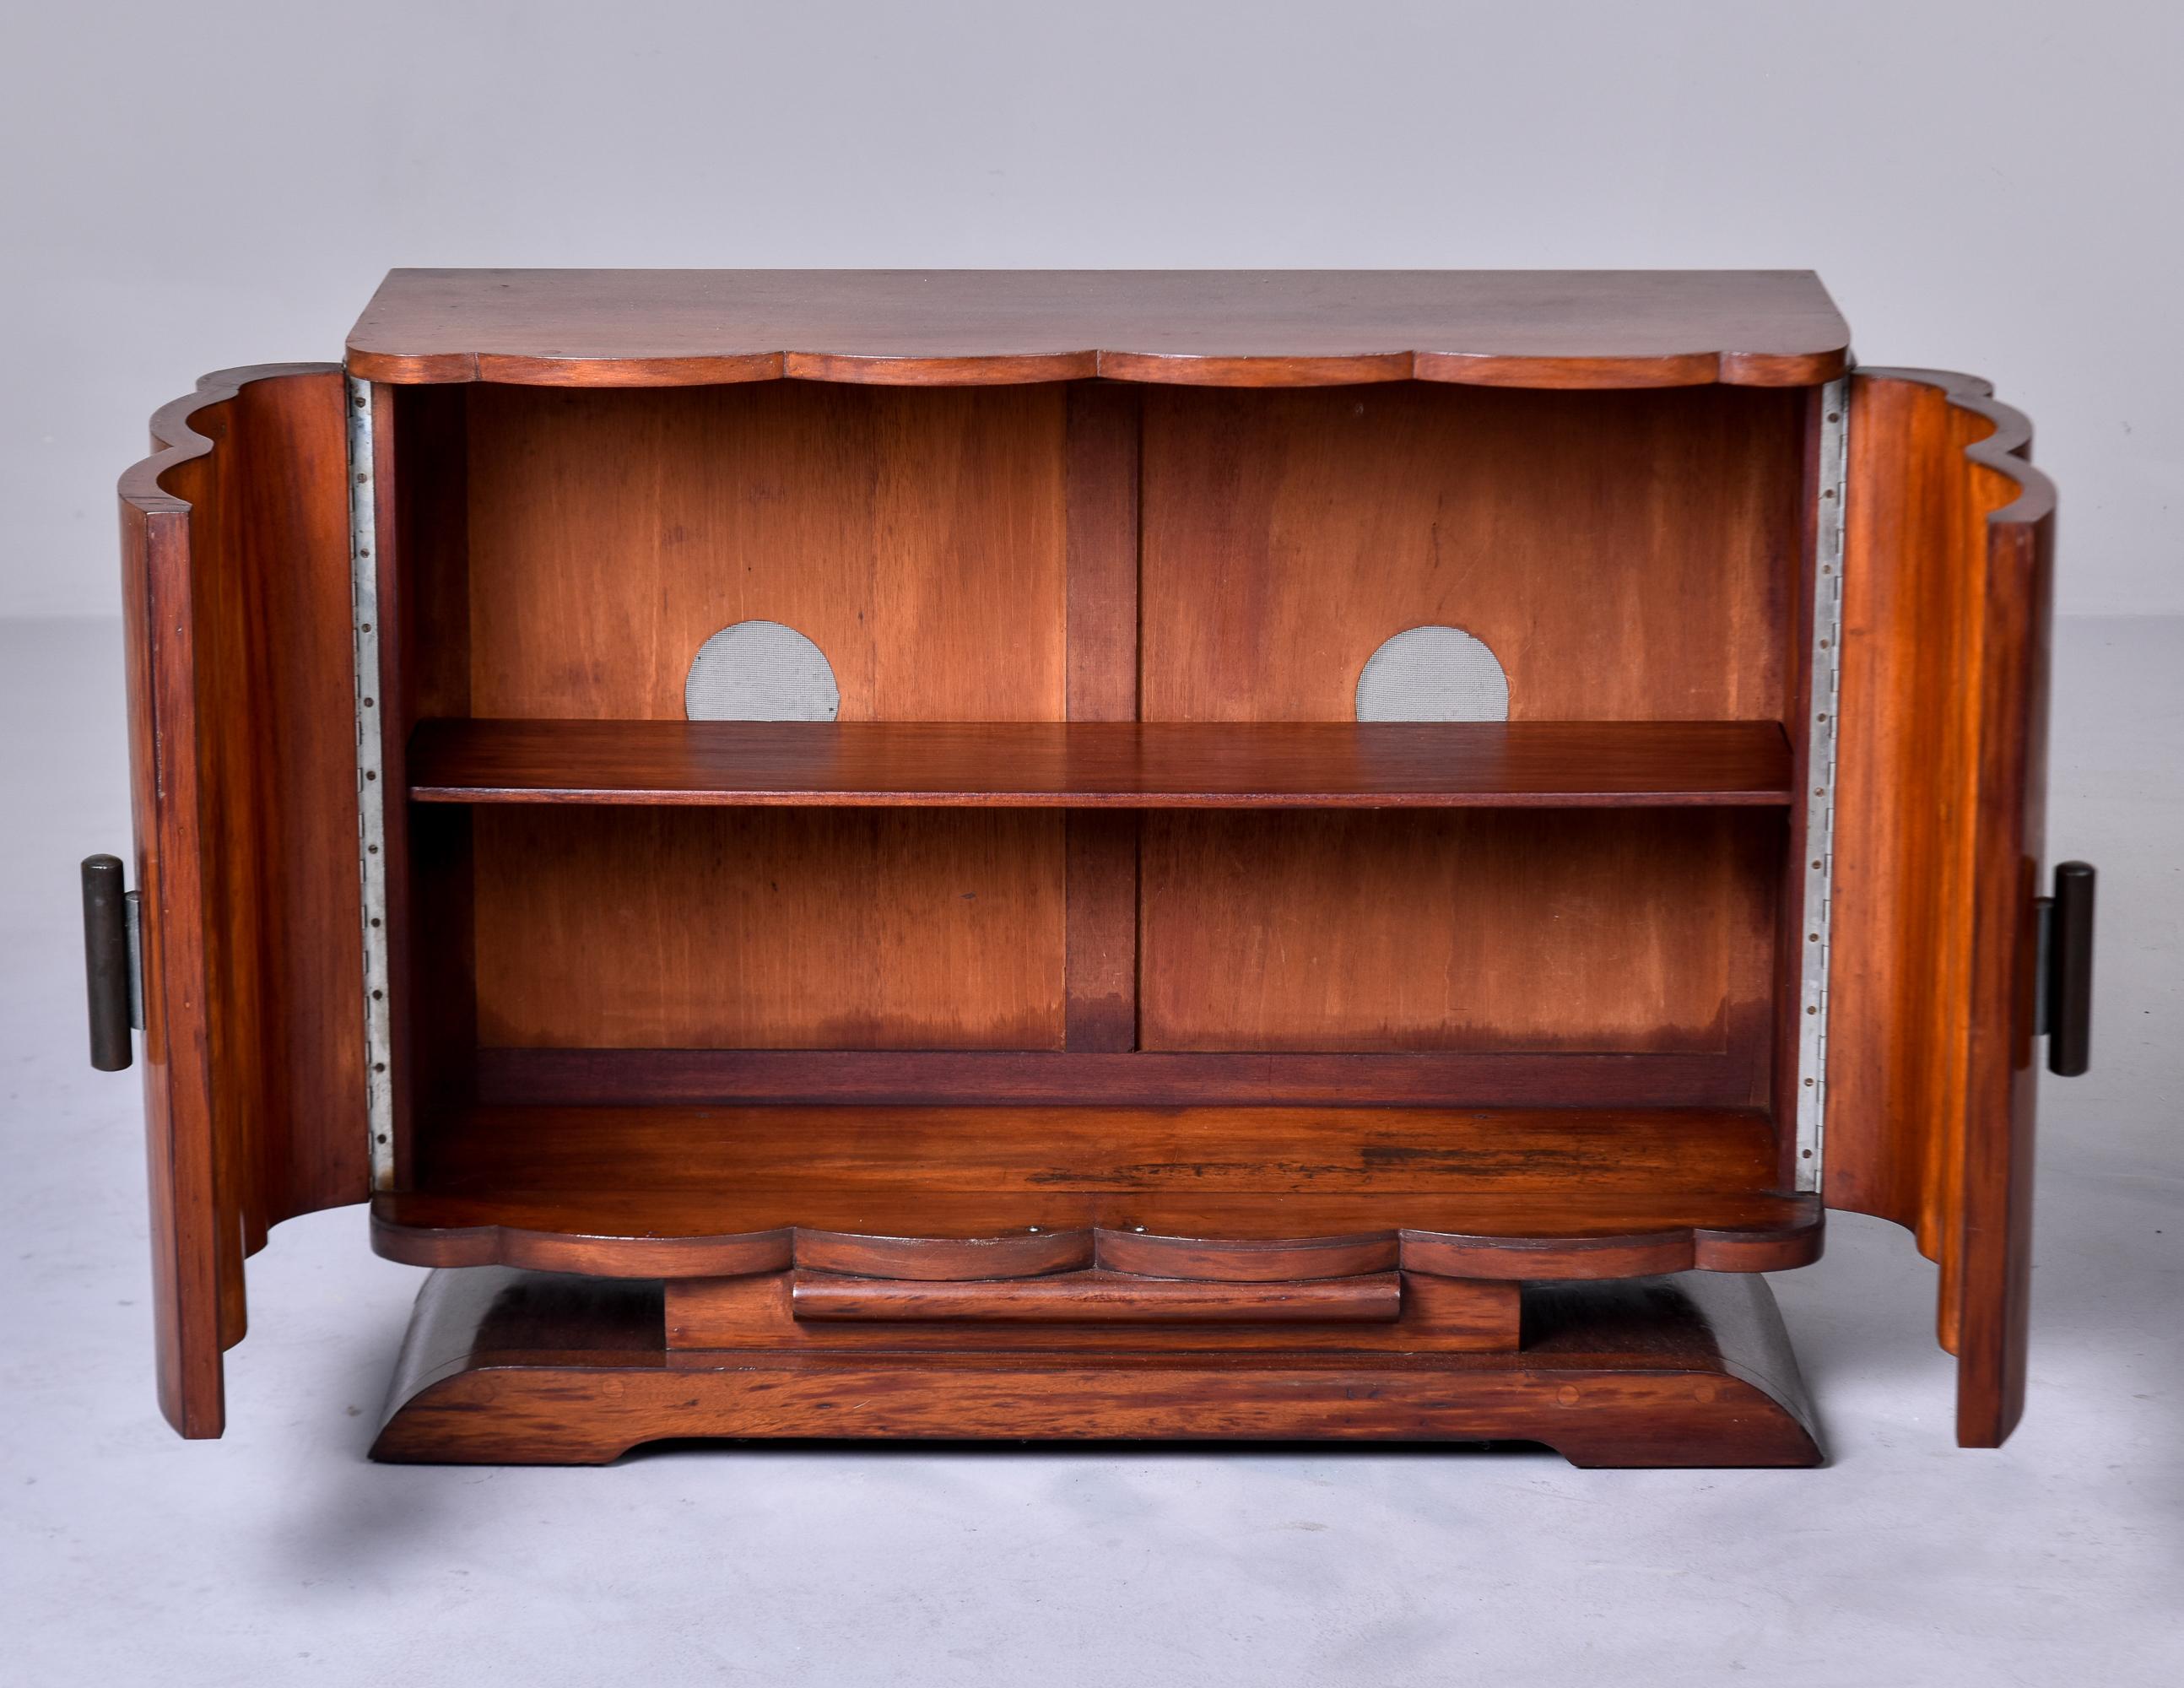 20th Century French Art Deco Mahogany Bar Cabinet with Curved Doors and Pedestal Base